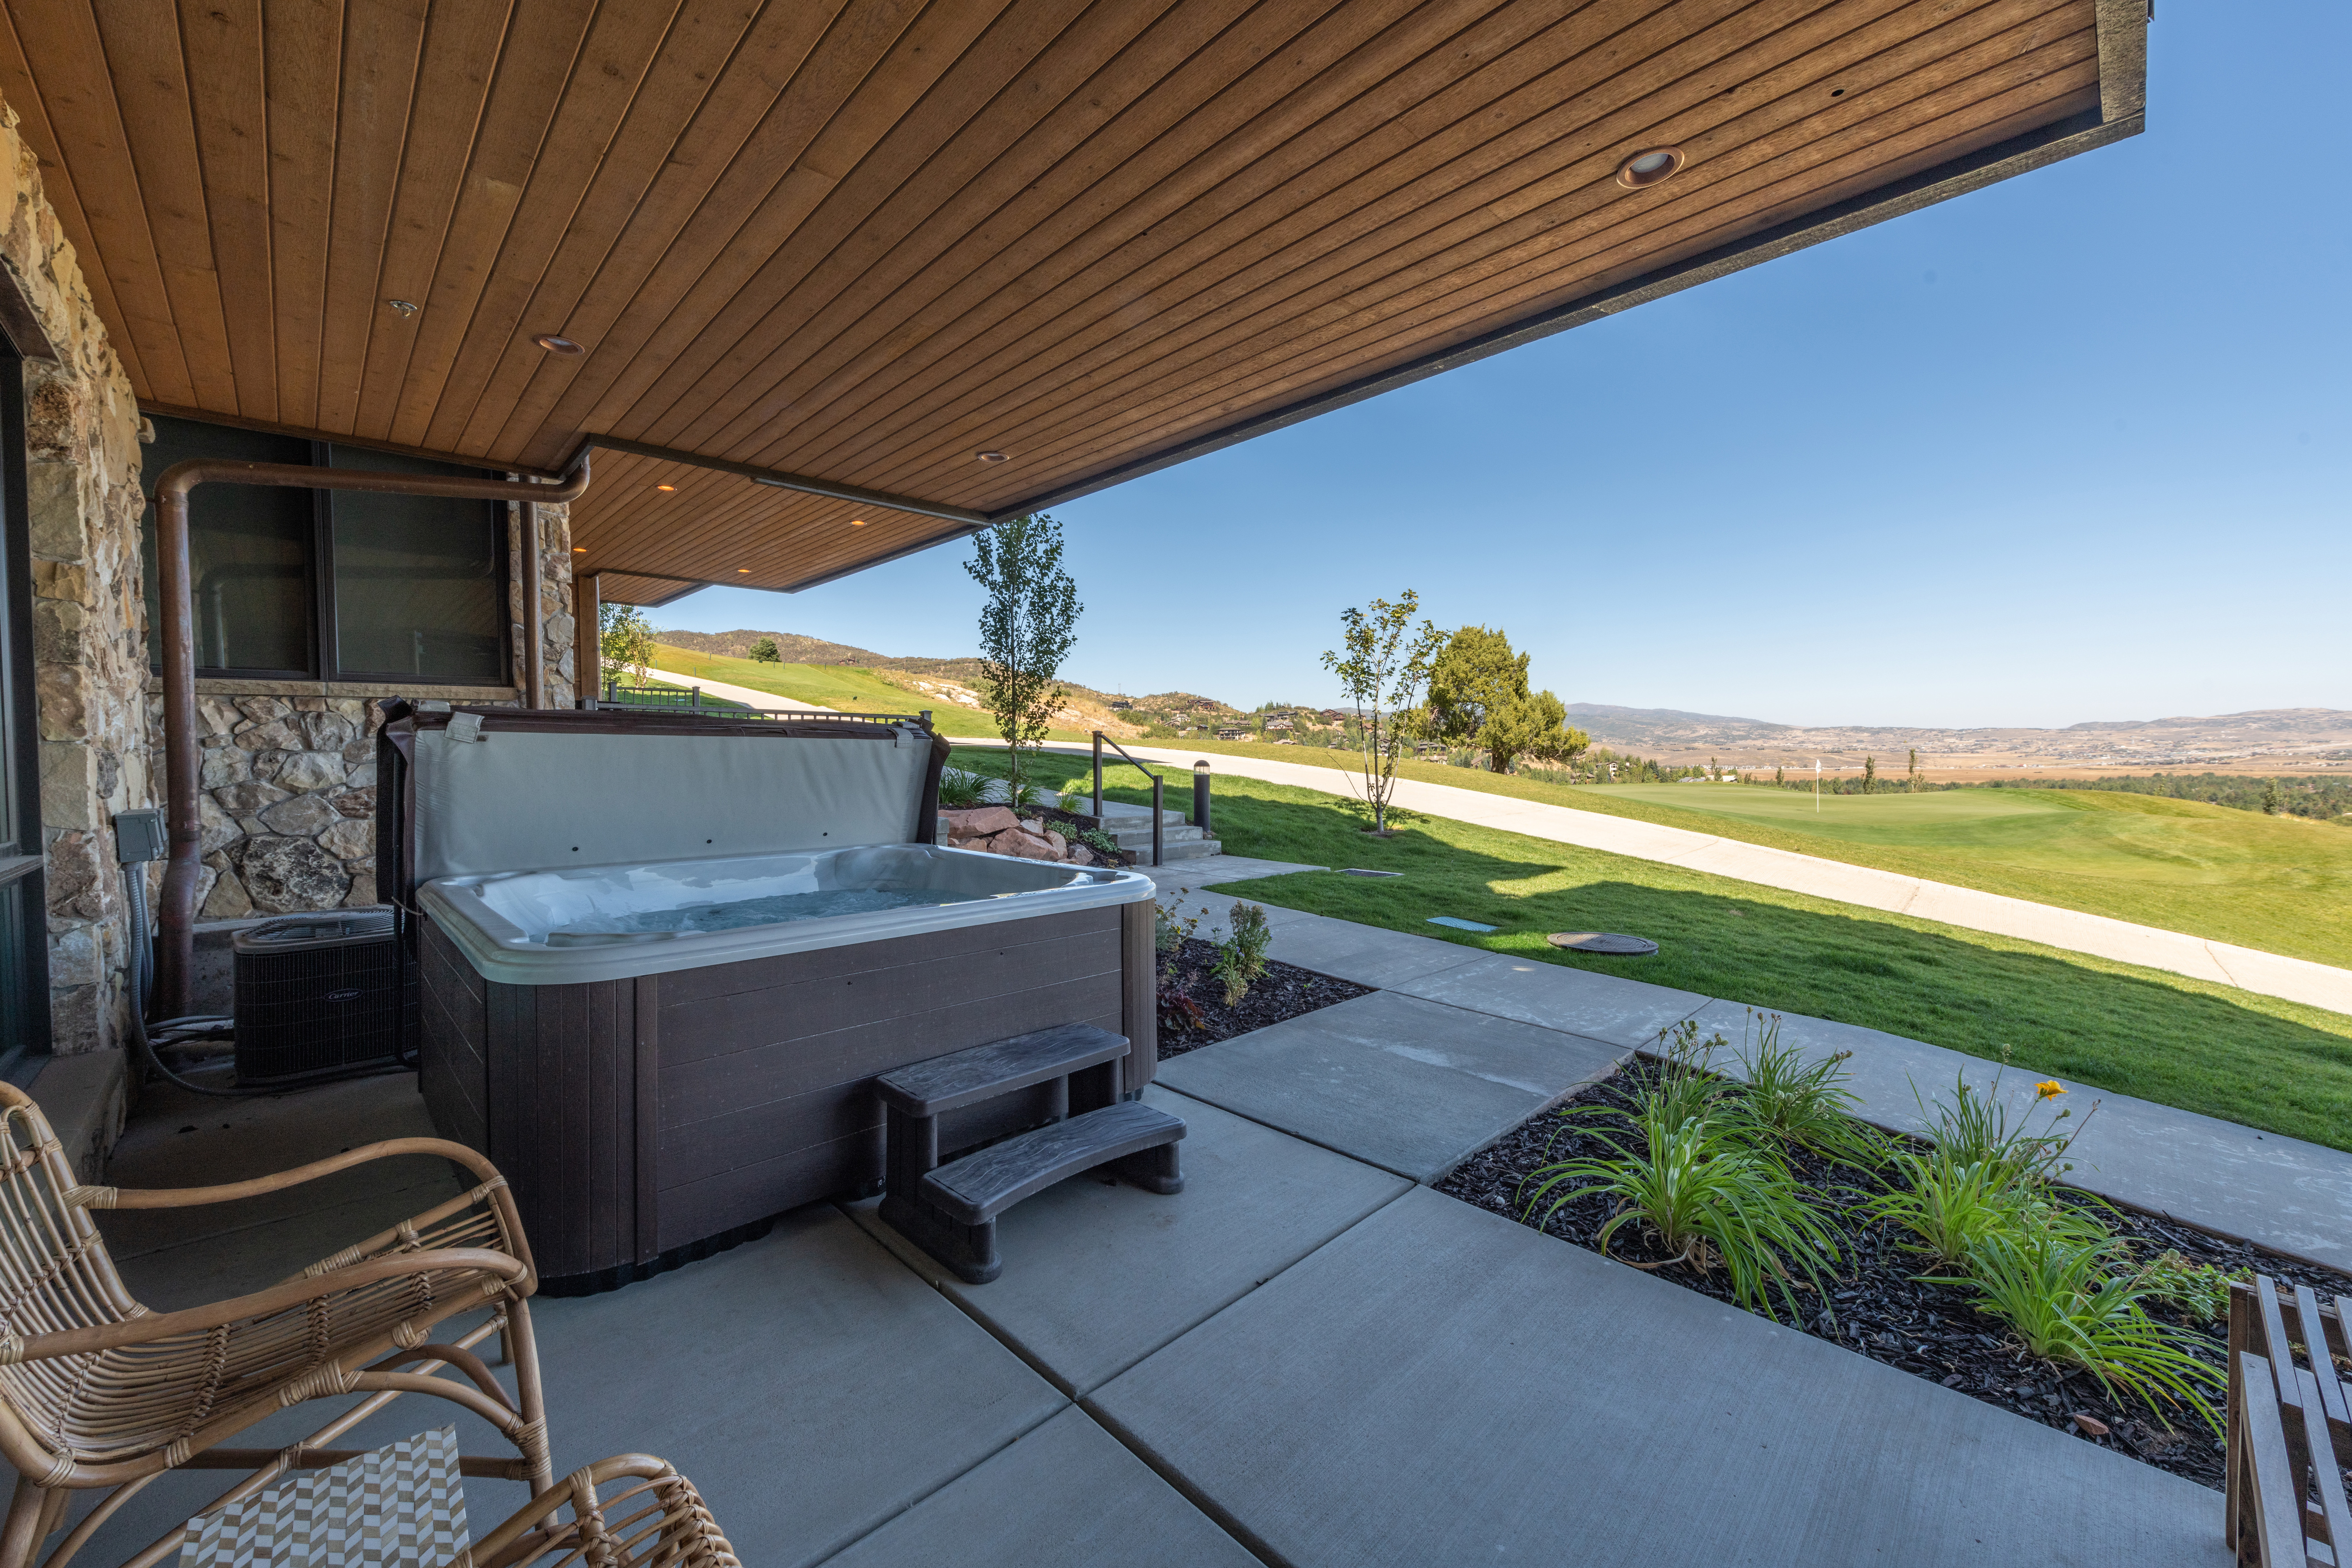 Outside the second living area is the patio, private hot tub, walking paths and golf course